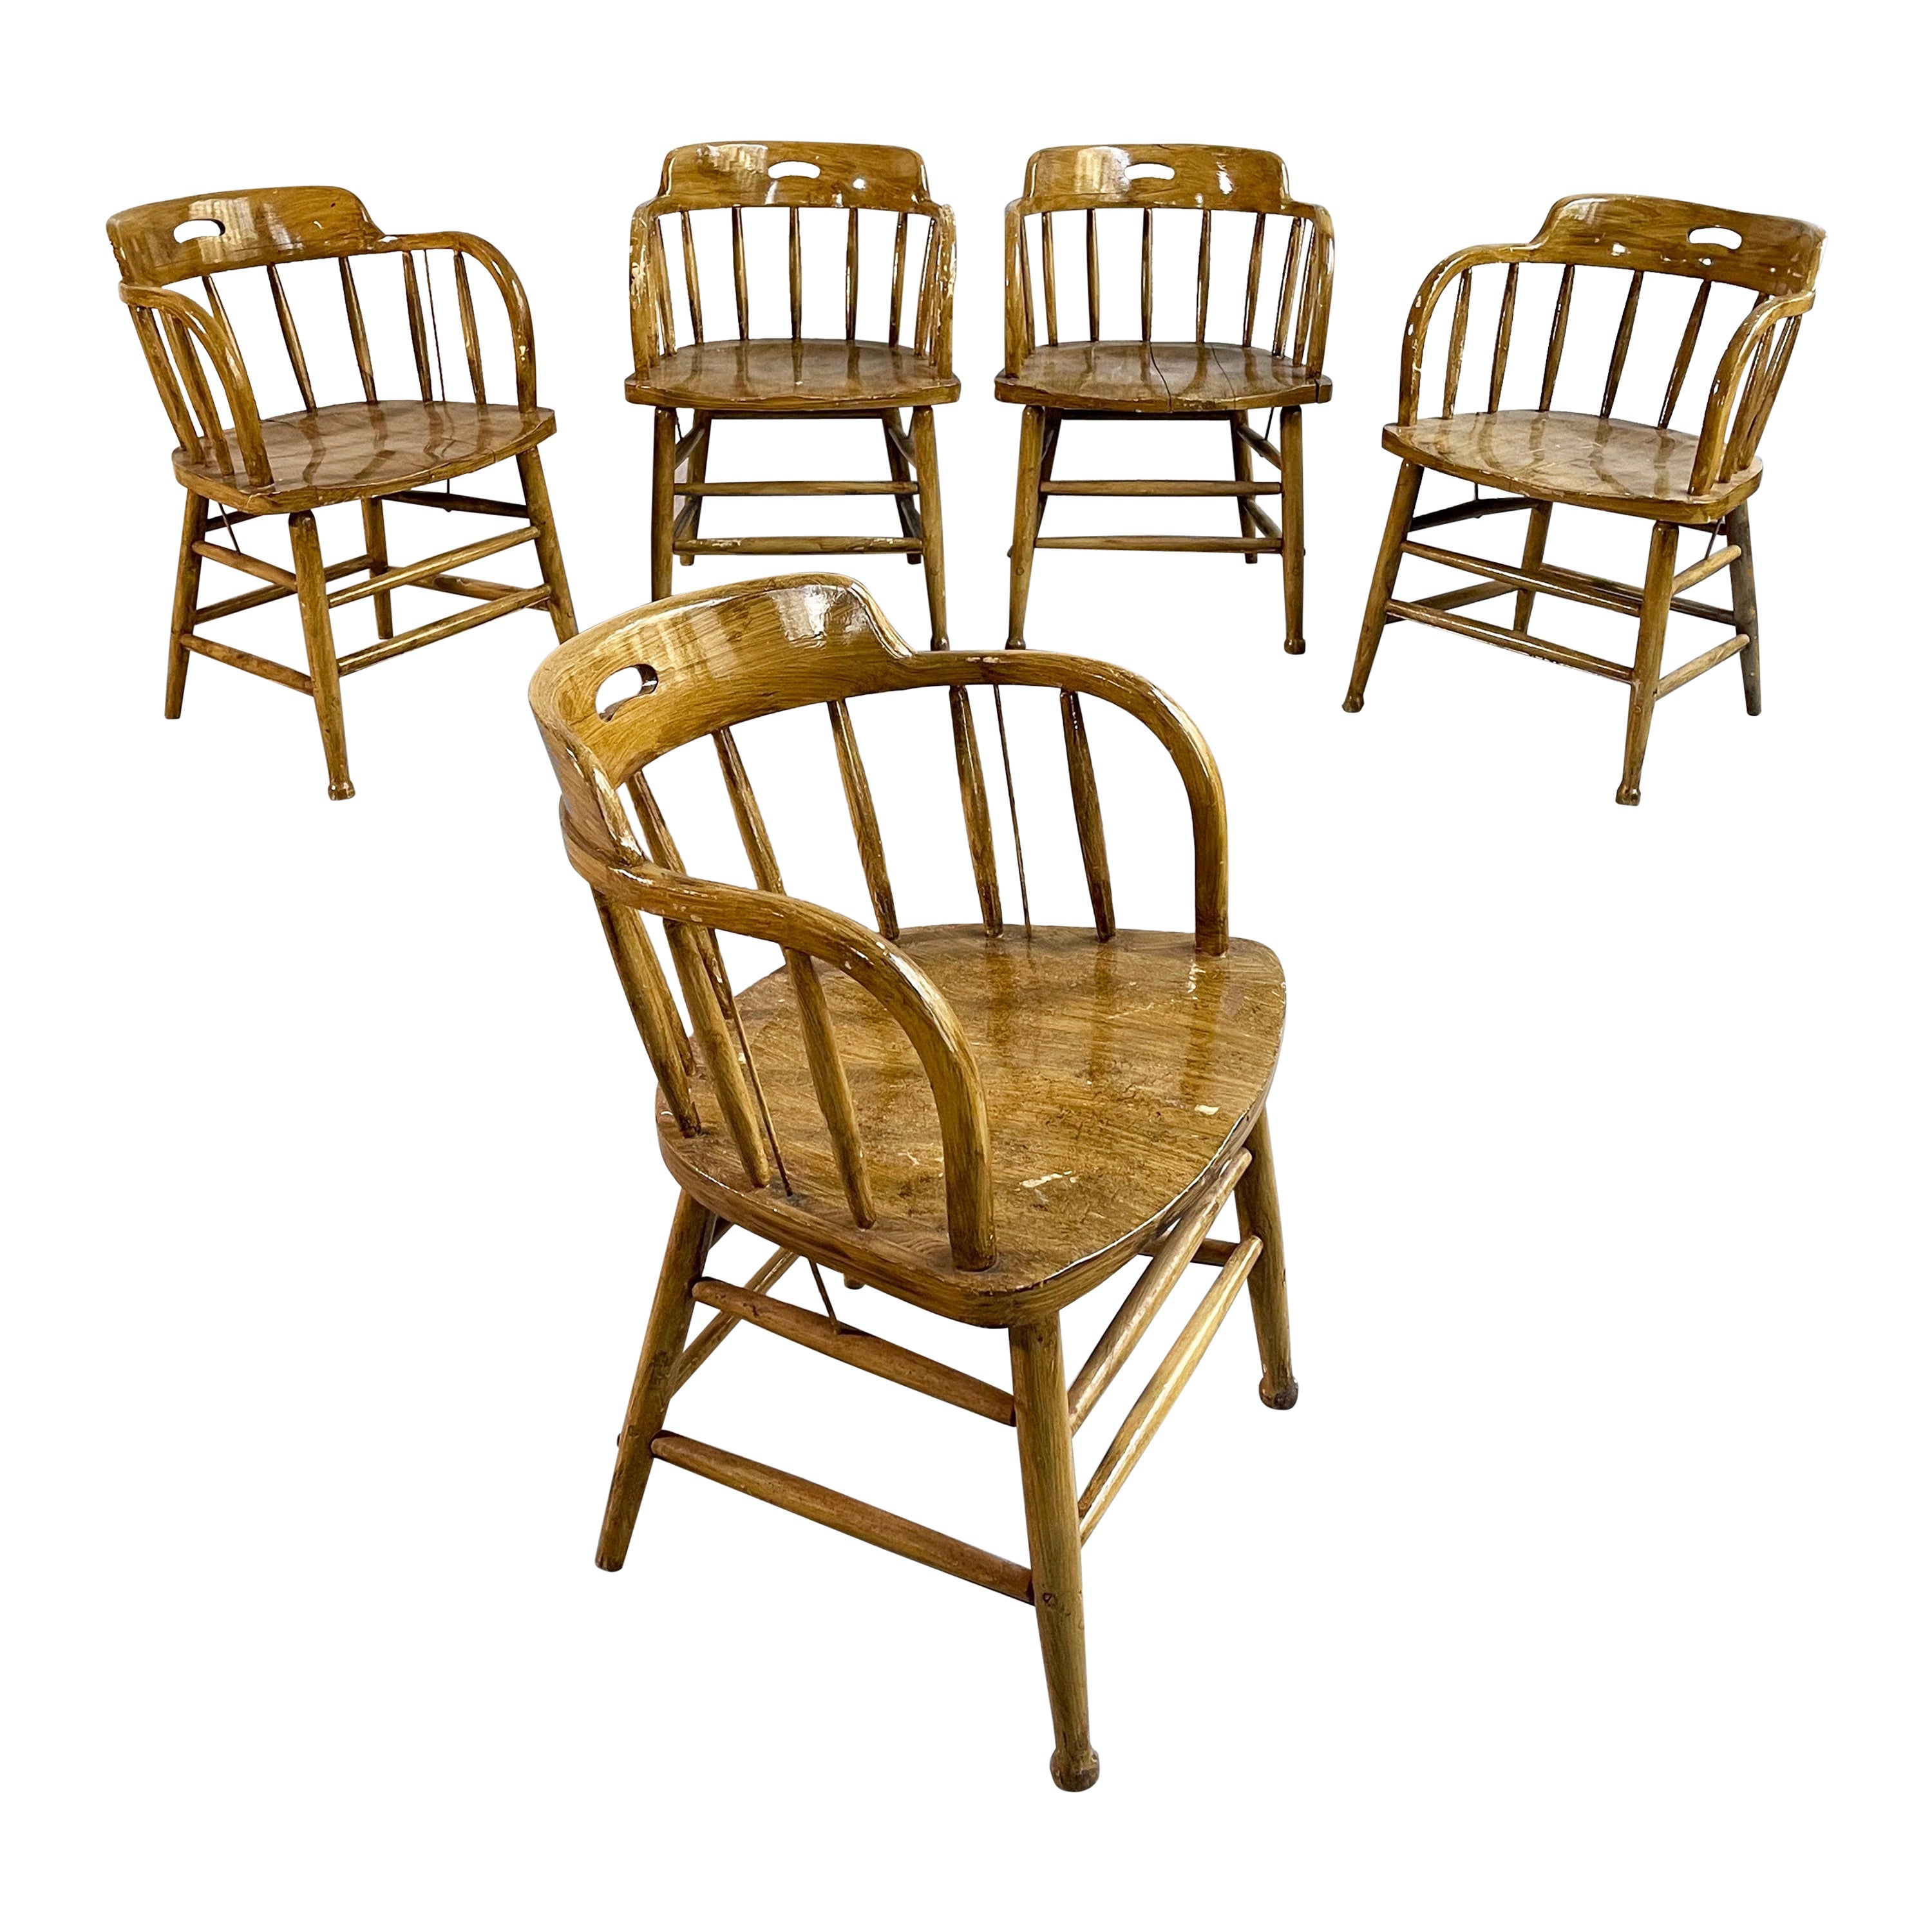 Early 20th Century, Rustic Oak Firehouse Dining Chairs For Sale